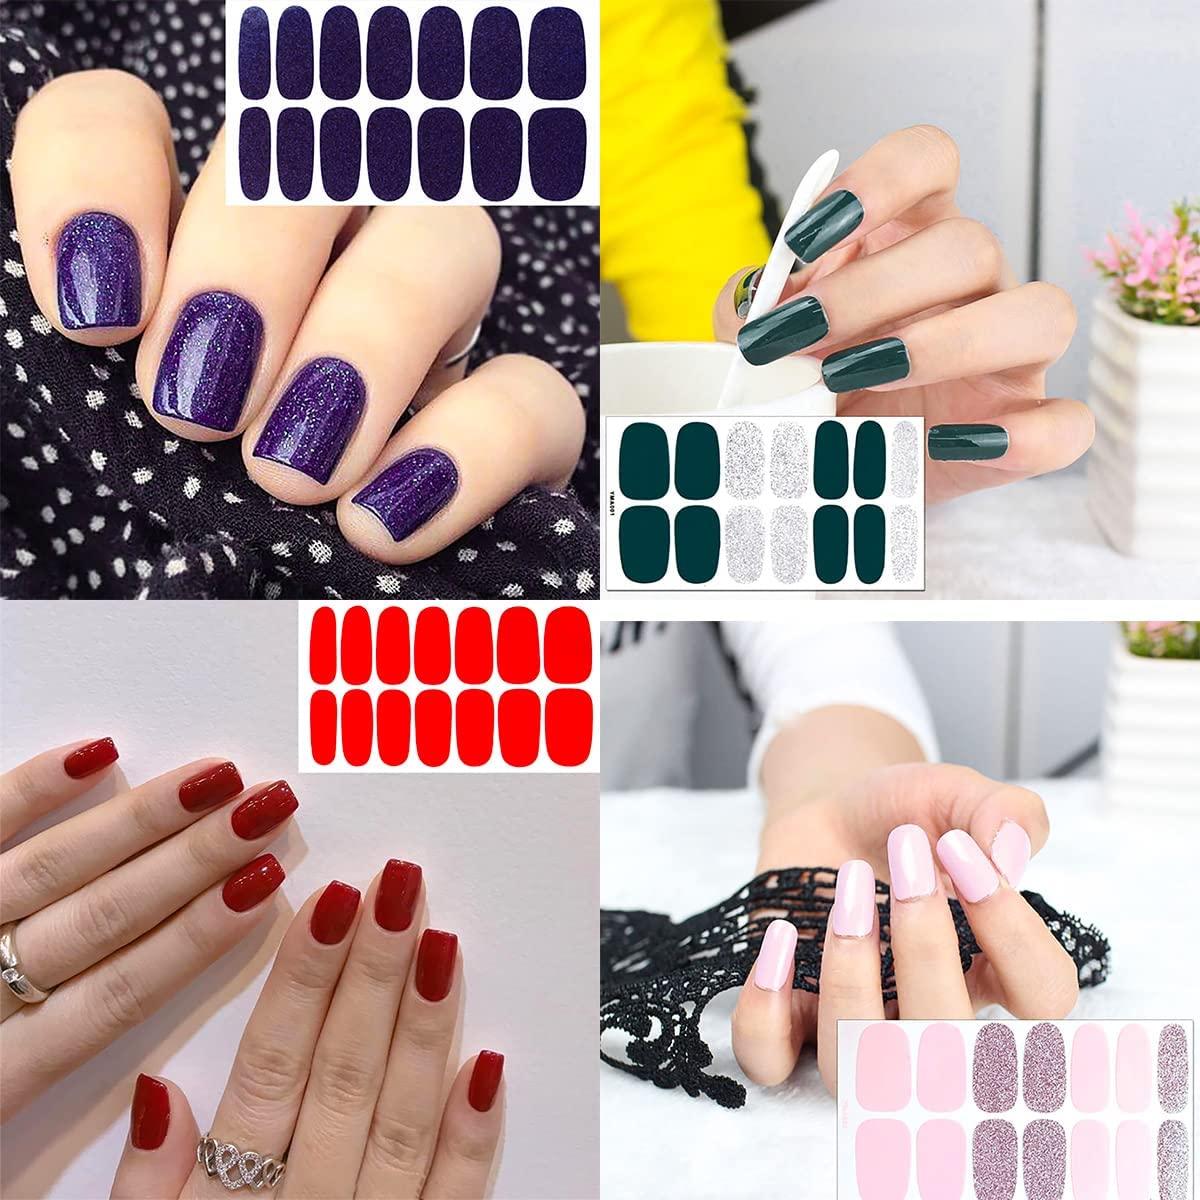 Nail Art Oil-based Nail Polish, 2pcs Oil-based Nail Polish, Quick-drying  Without Lighting, Morandi Color Autumn And Winter Color Christmas Green  Milky White Two-color Combination Nail Polish, Suitable For Home Diy  Manicure Beginners